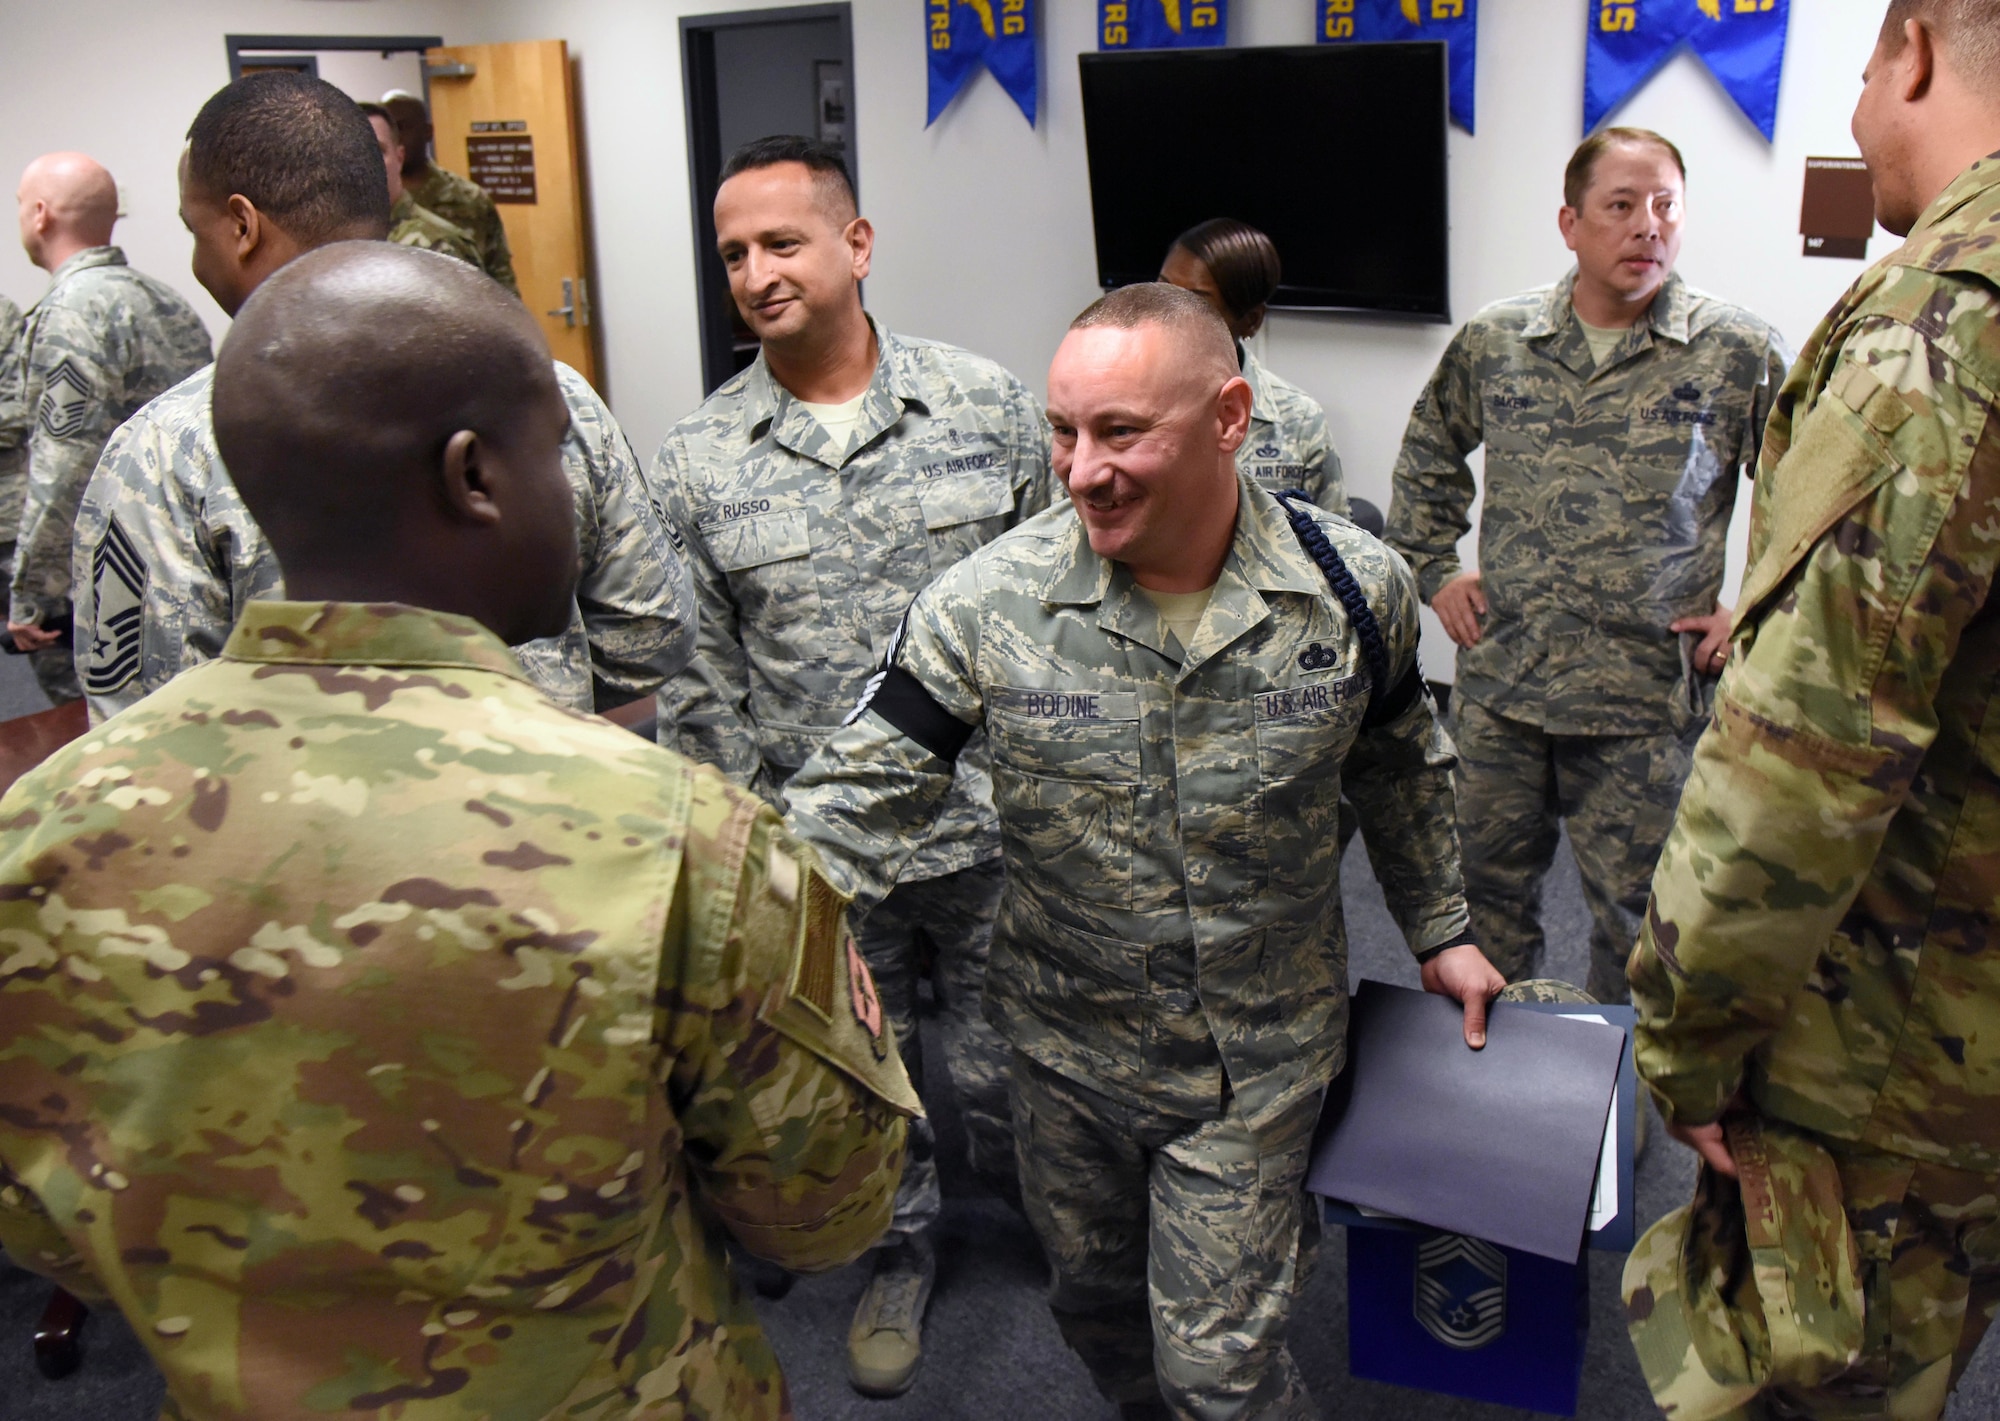 U.S. Air Force Senior Master Sgt. Andrew Bodine, 81st Training Group Military Training superintendent, is congratulated upon the notification of his promotion to the rank of chief master sergeant at Keesler Air Force Base, Mississippi, Dec. 4, 2018. Five senior master sgts. were notified and congratulated for their promotion by the base's leadership and chiefs. (U.S. Air Force photo by Kemberly Groue)